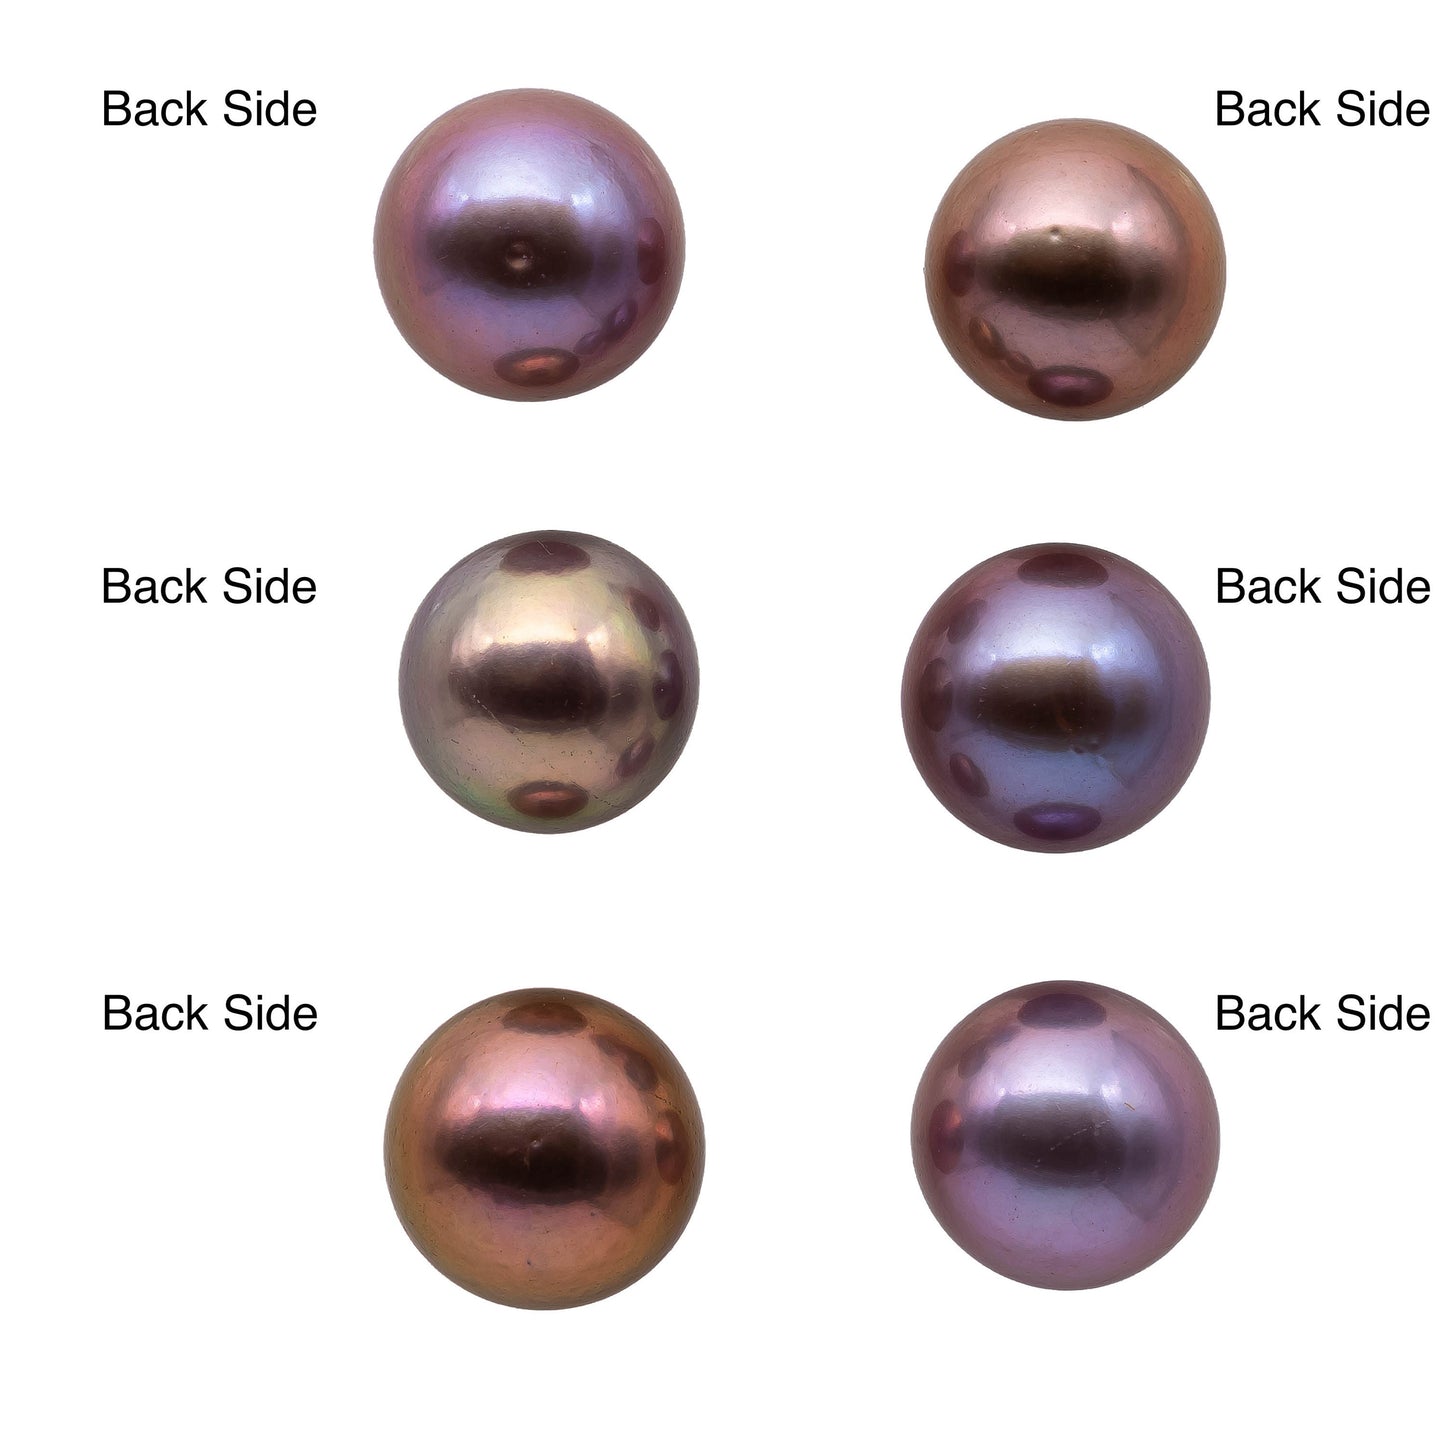 AAA Loose Edison Pearl Round High Luster Undrilled Single Piece Freshwater Pearl Natural Color with Blemish in the Back 13-14mm, SKU# 1152EP